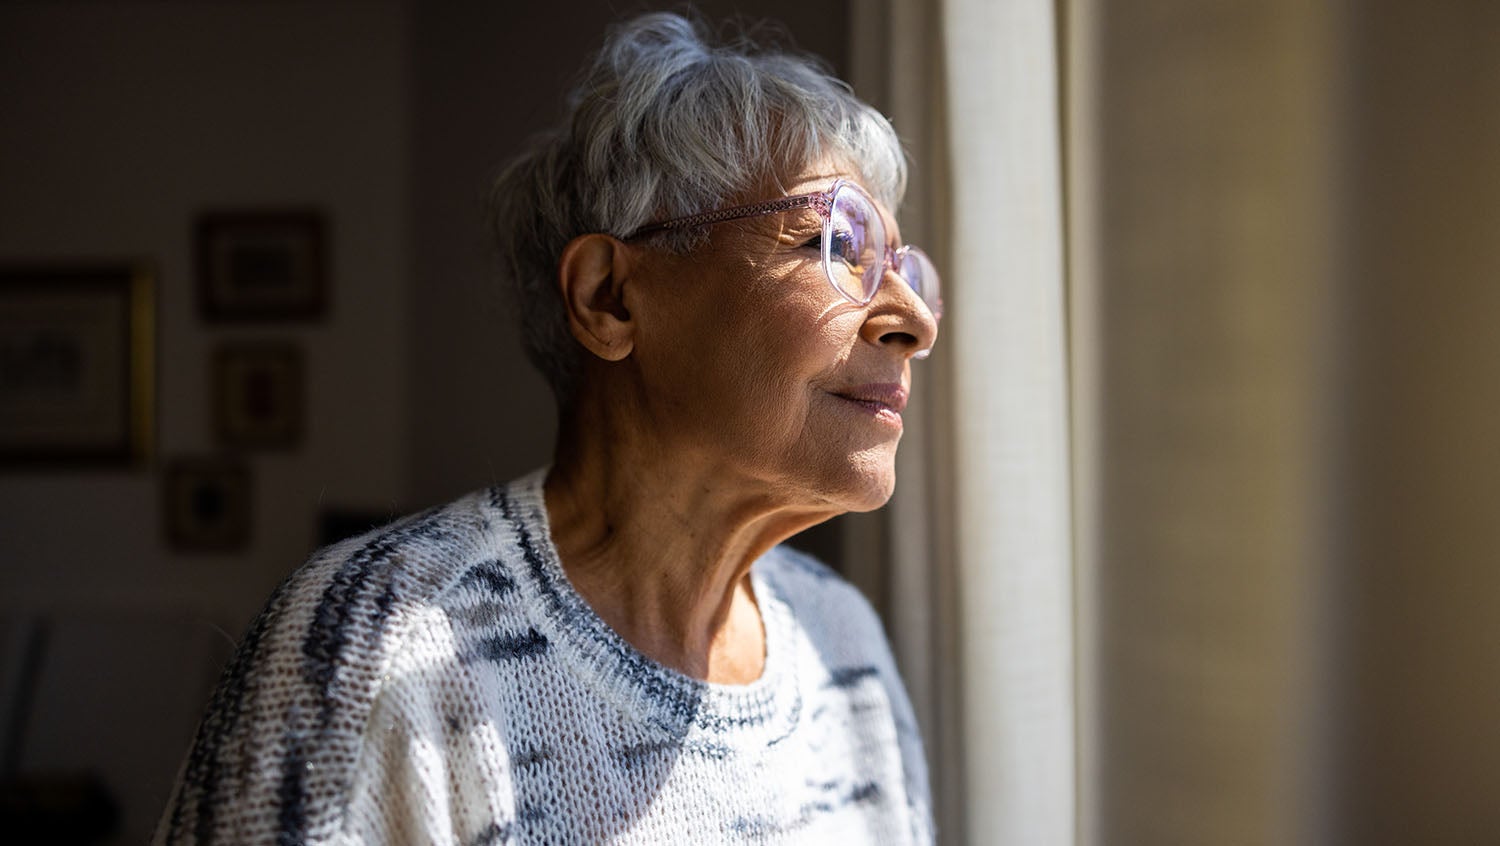 multiracial elderly woman wearing glasses and a sweater looking out a window